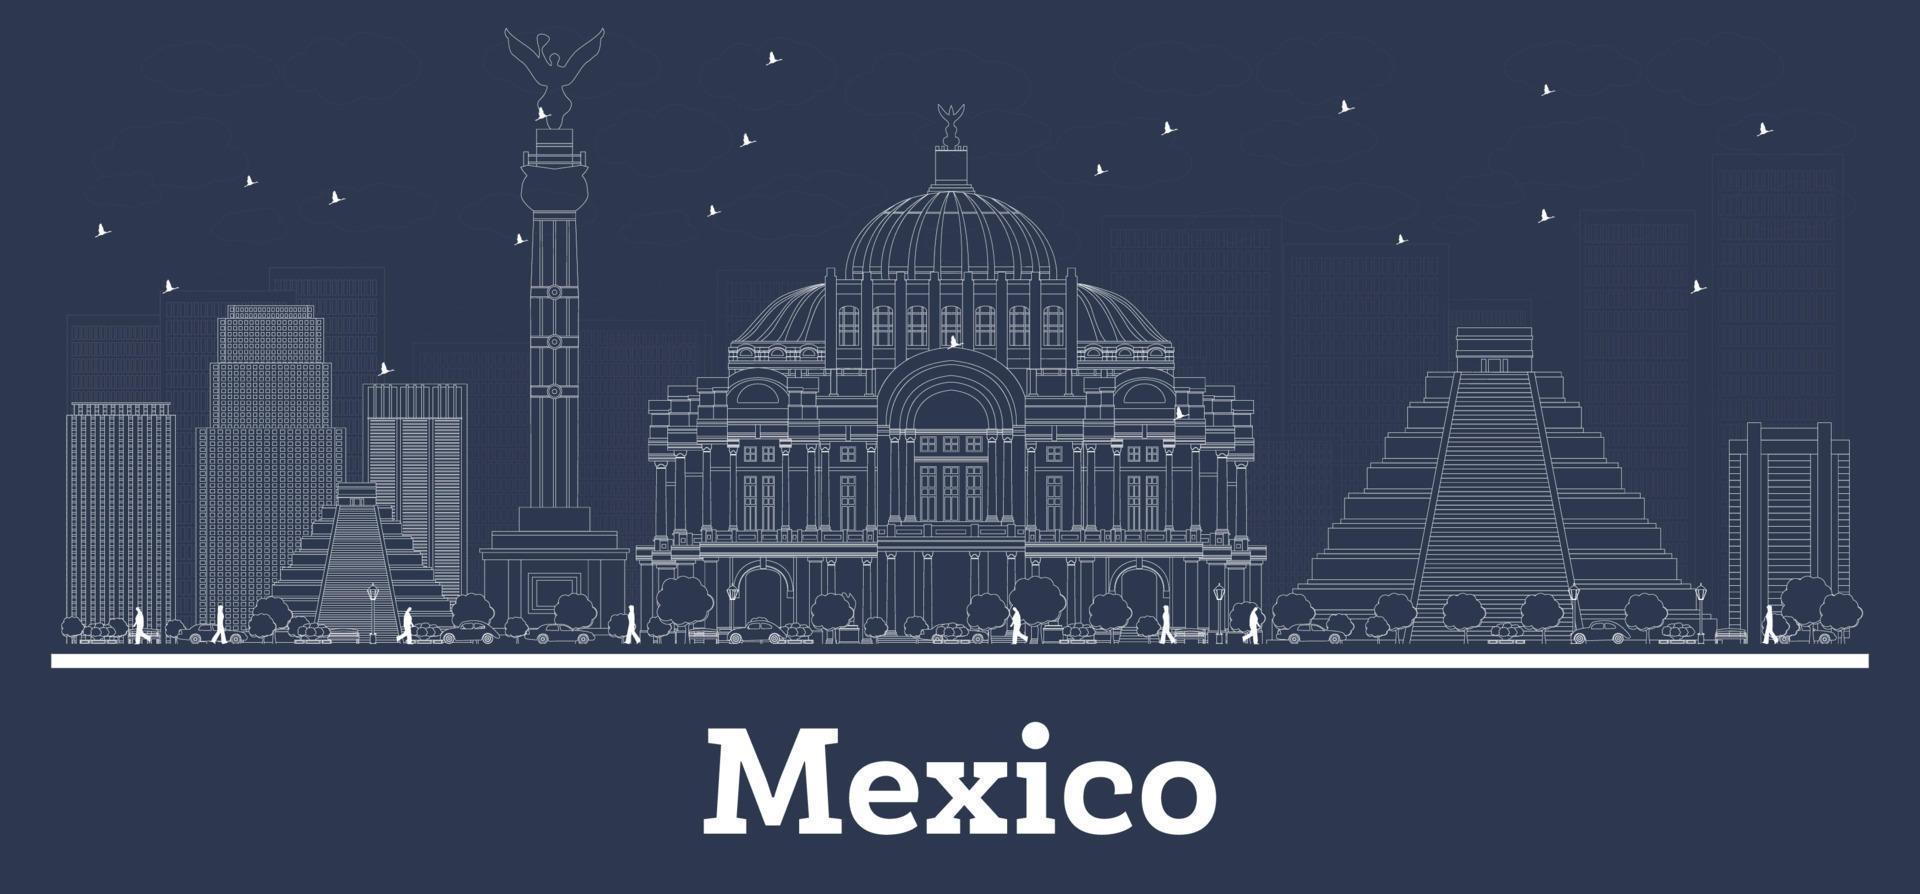 Outline Mexico City Skyline with White Buildings. vector